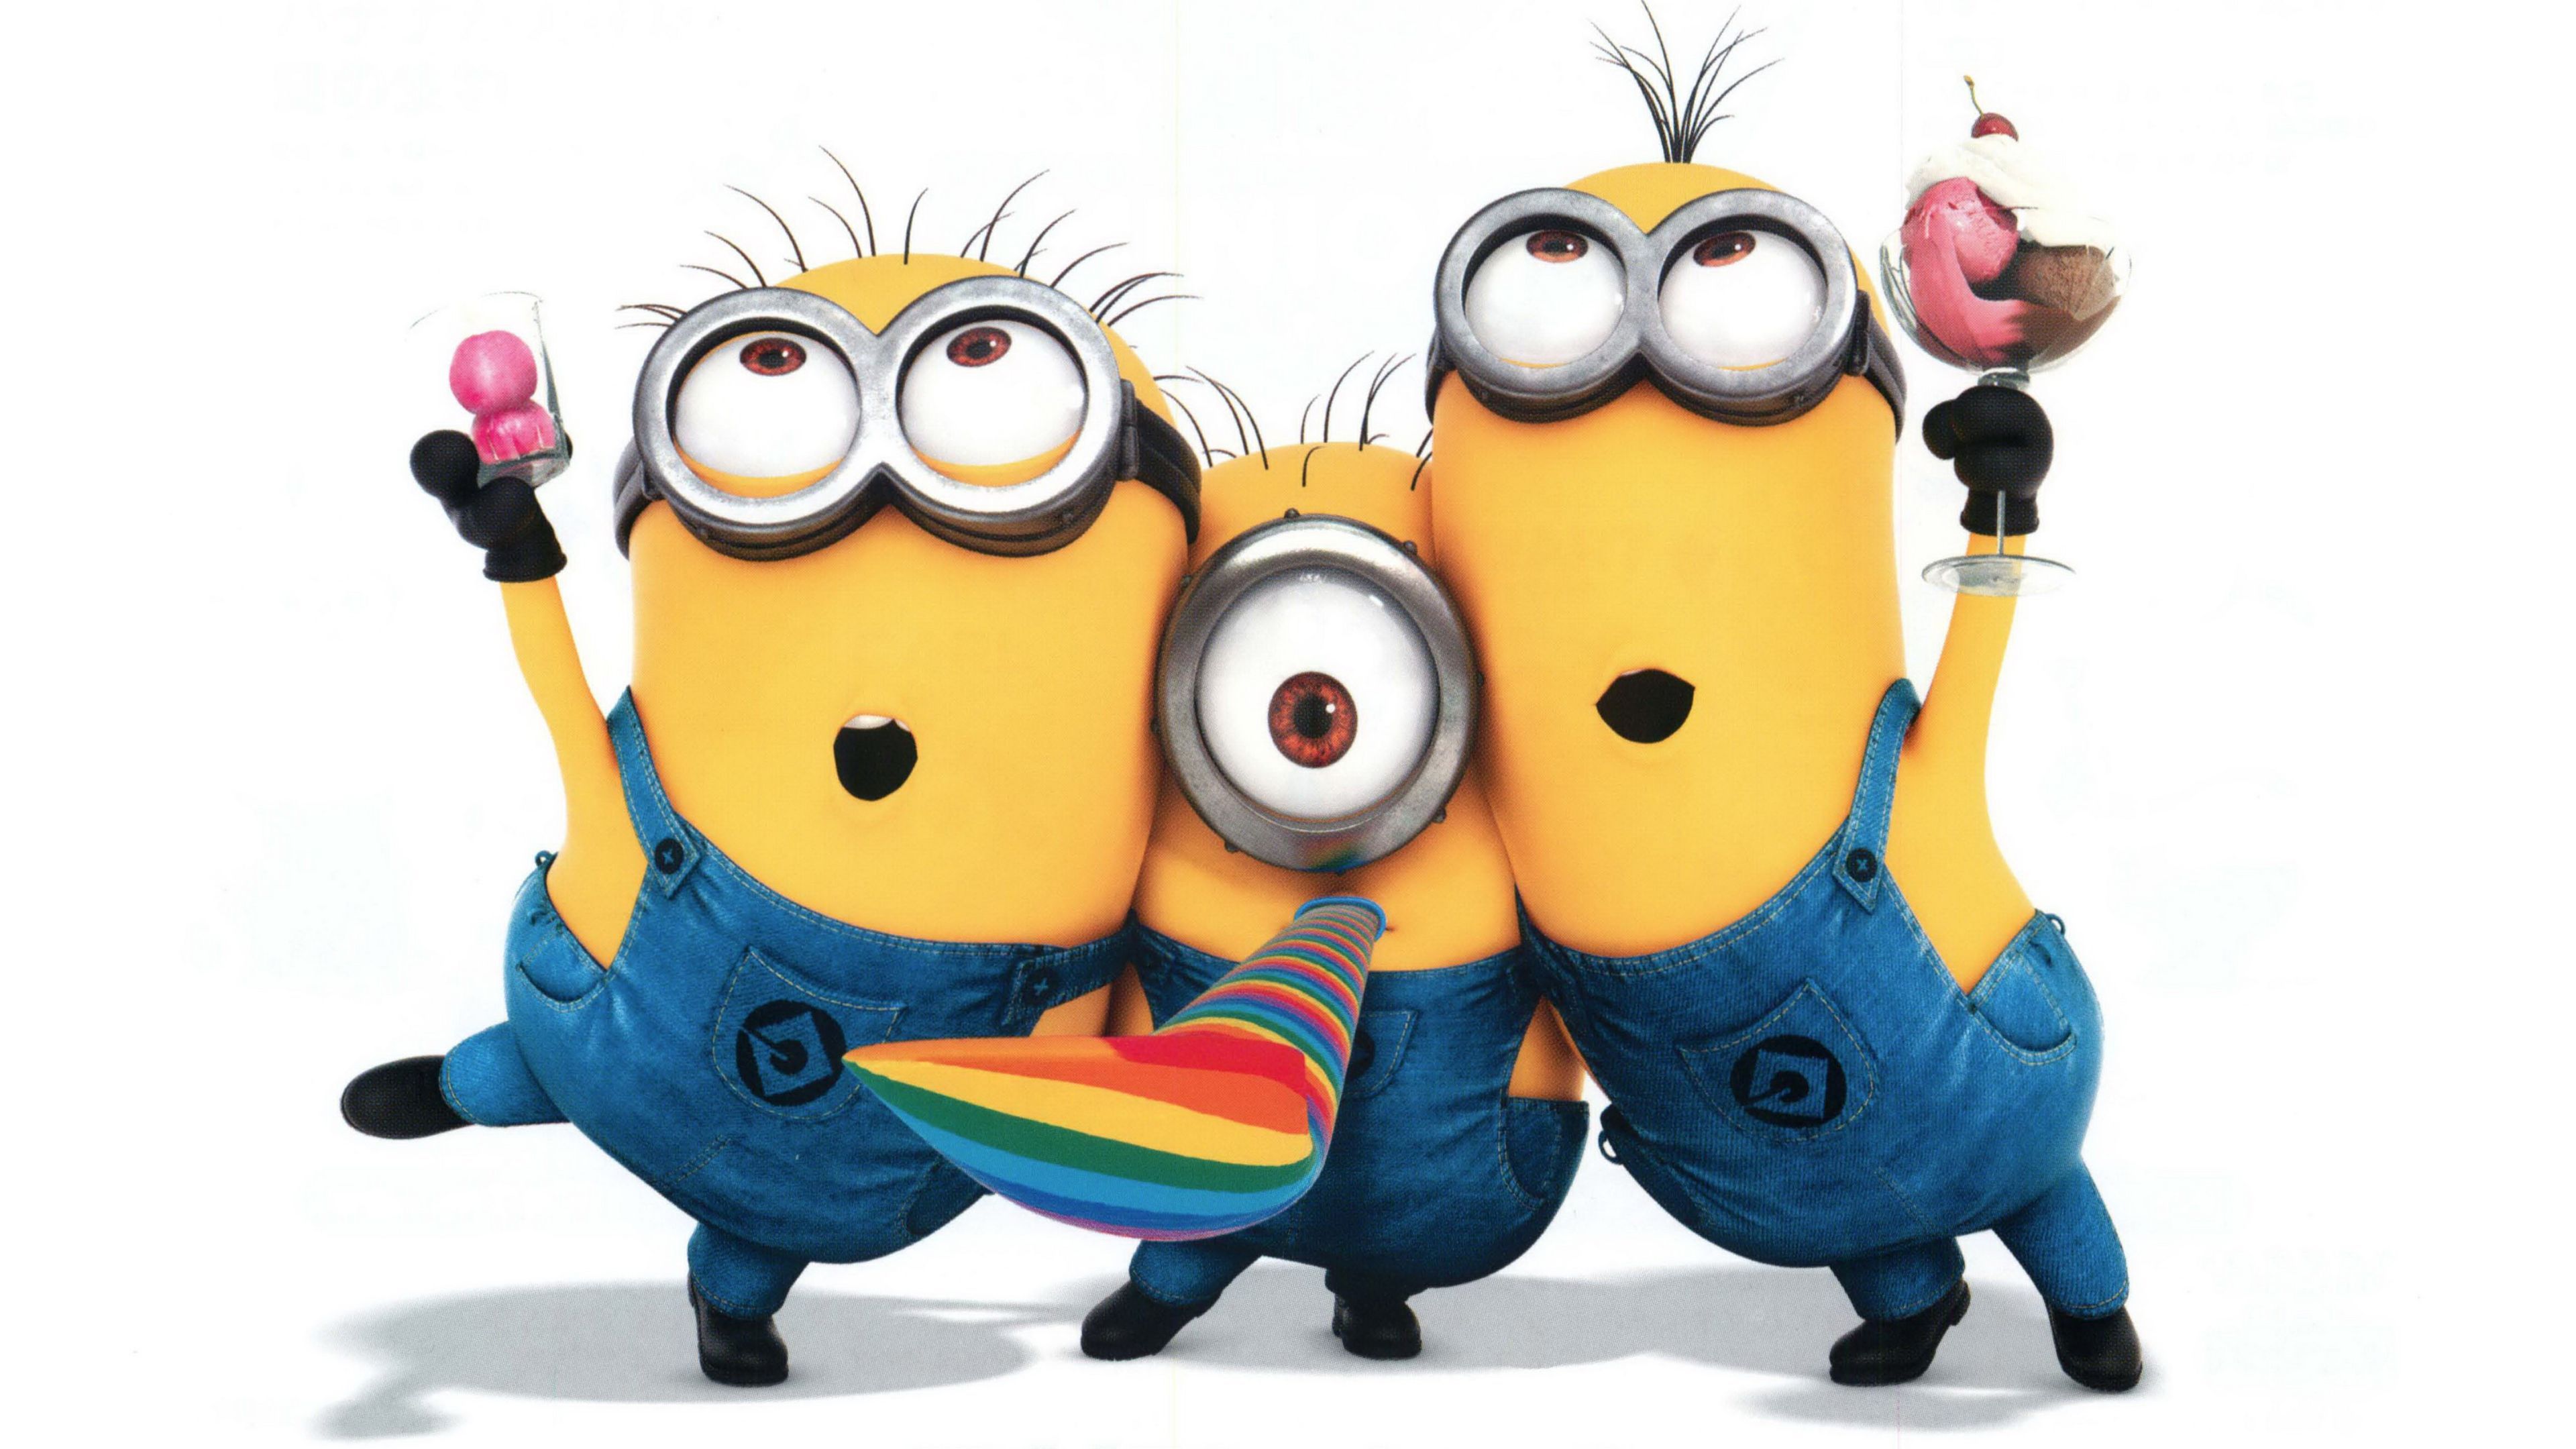 Minions 4K wallpaper for your desktop or mobile screen free and easy to download